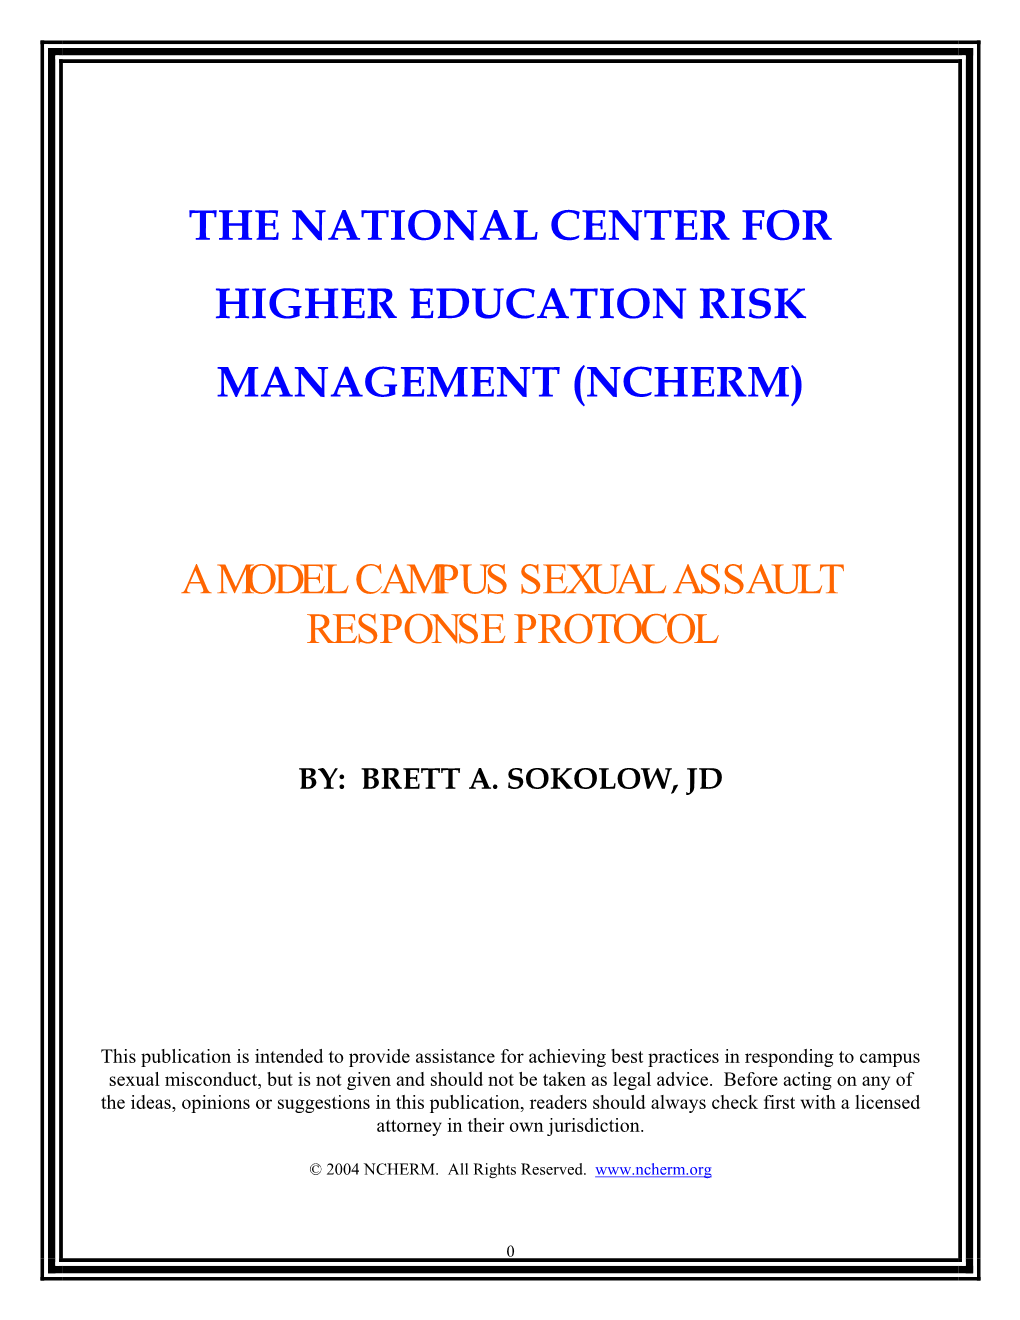 The NCHERM Model Campus Sexual Assault Response Protocol